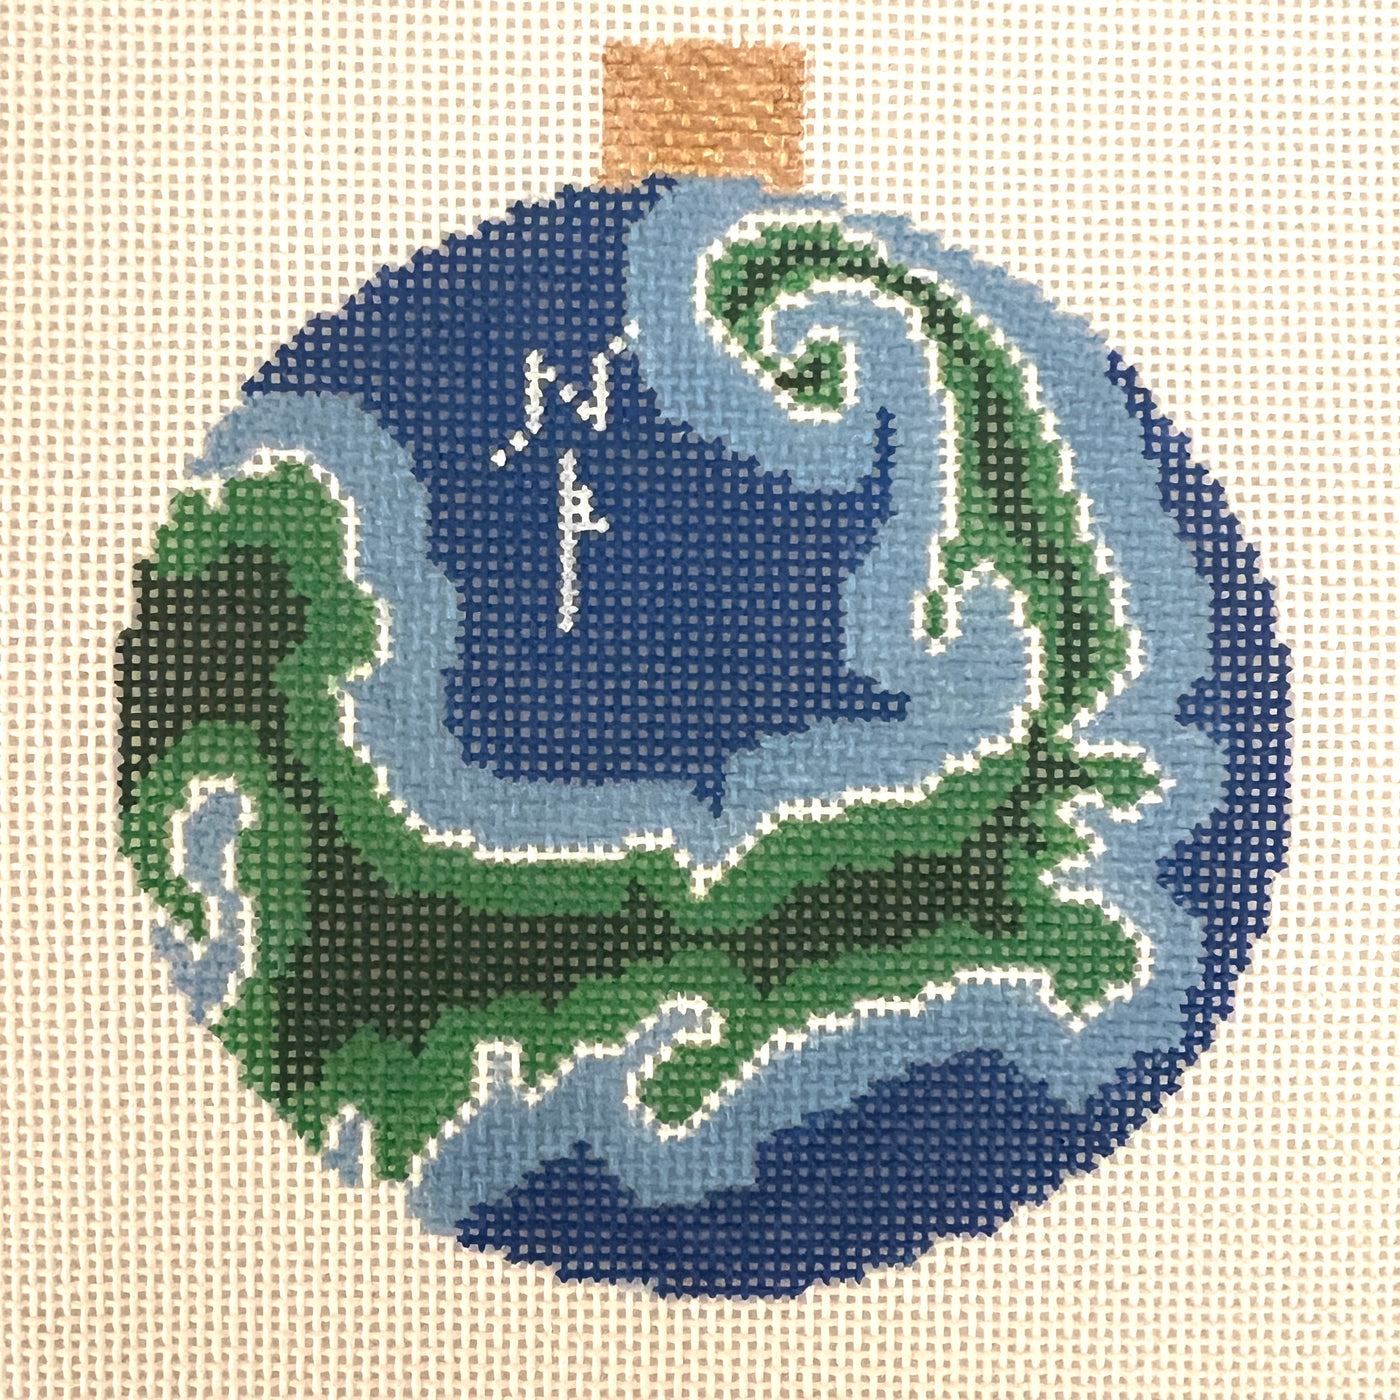 Cape Cod Map Ornament Needlepoint Canvas